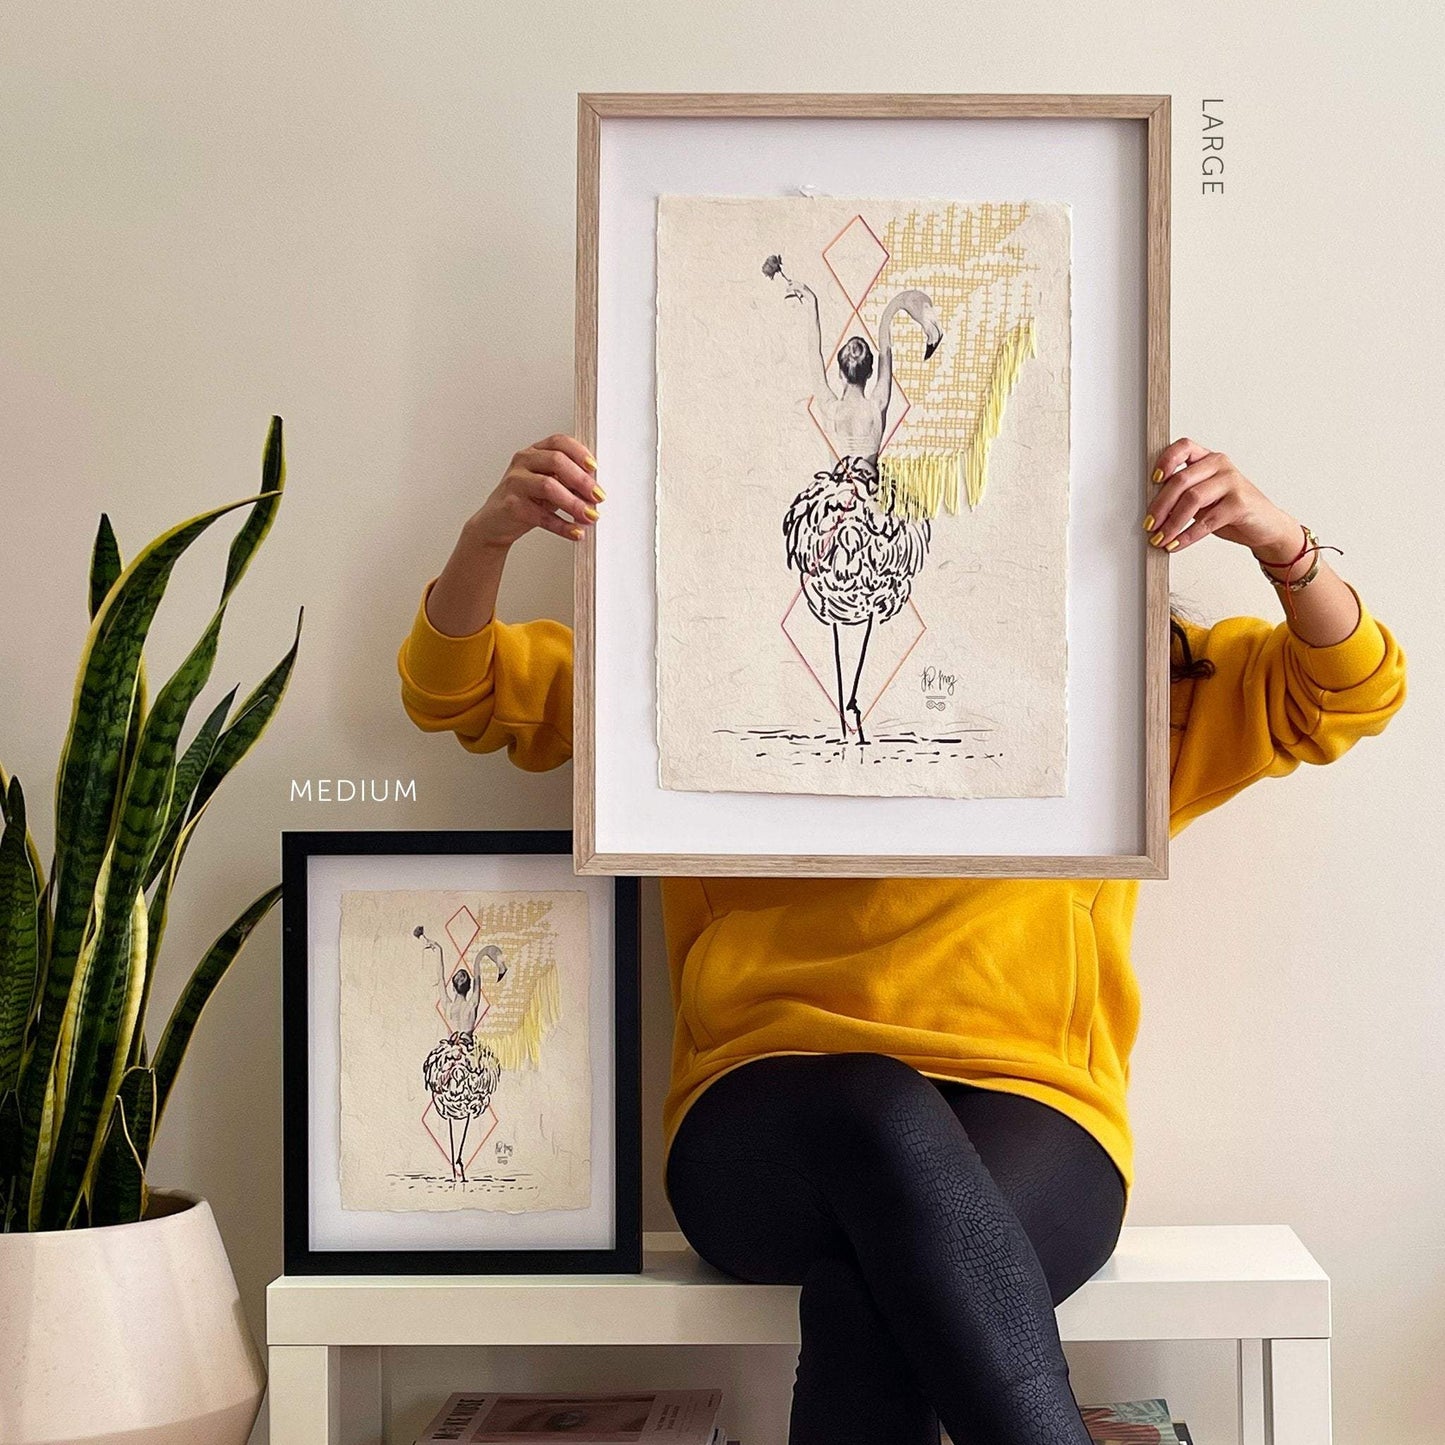 Ballerina art print, hand embroidery, flamingo art, gallery wall art, home decoration, embroidery pattern, mother's day gift - shopnoodo